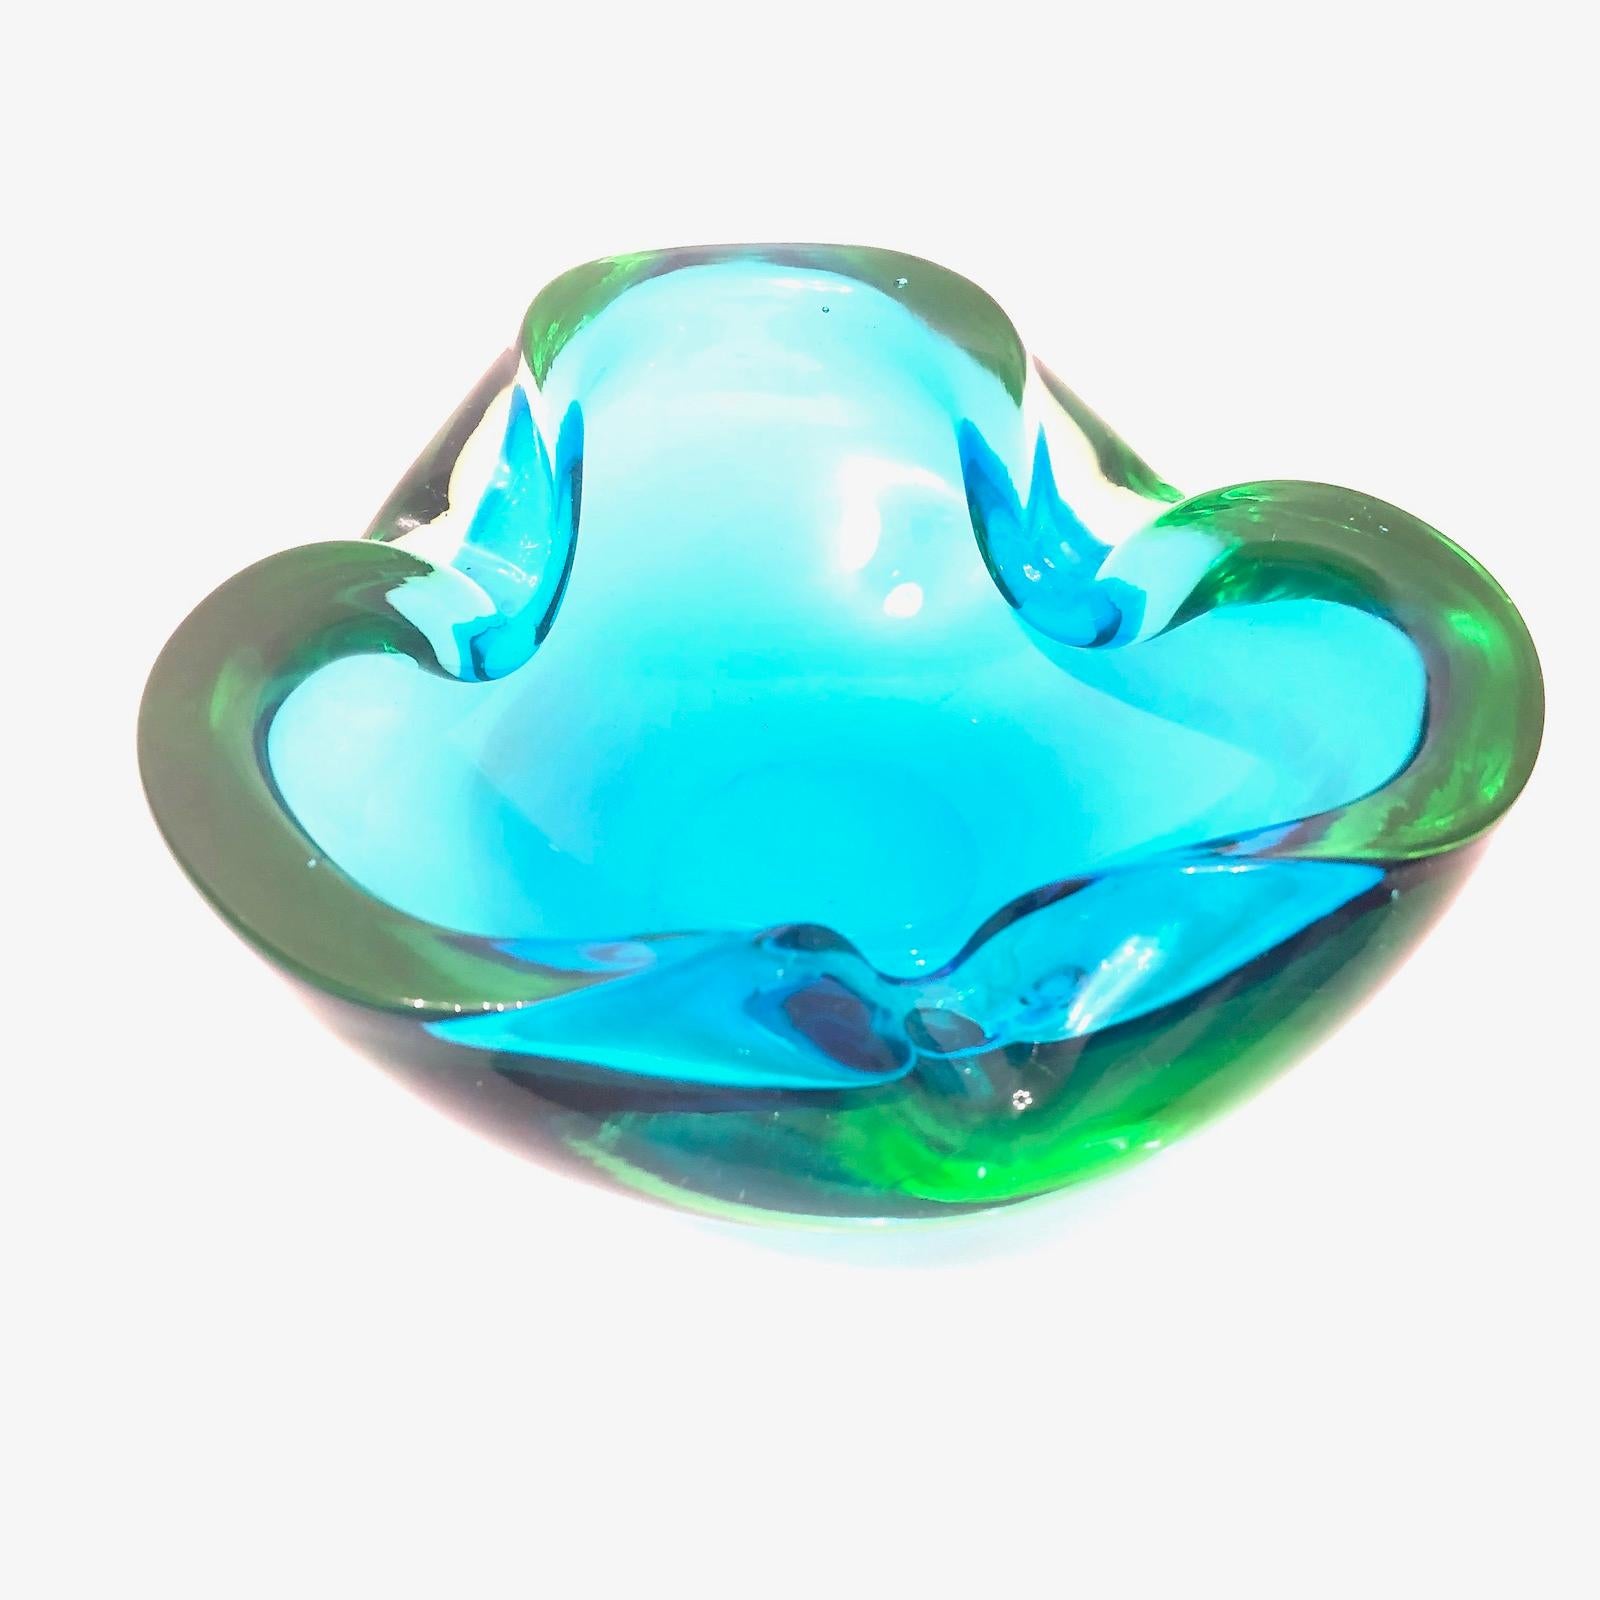 Mid-Century Modern Murano Art Glass Bowl Catchall Blue and green Vintage, Italy, 1970s